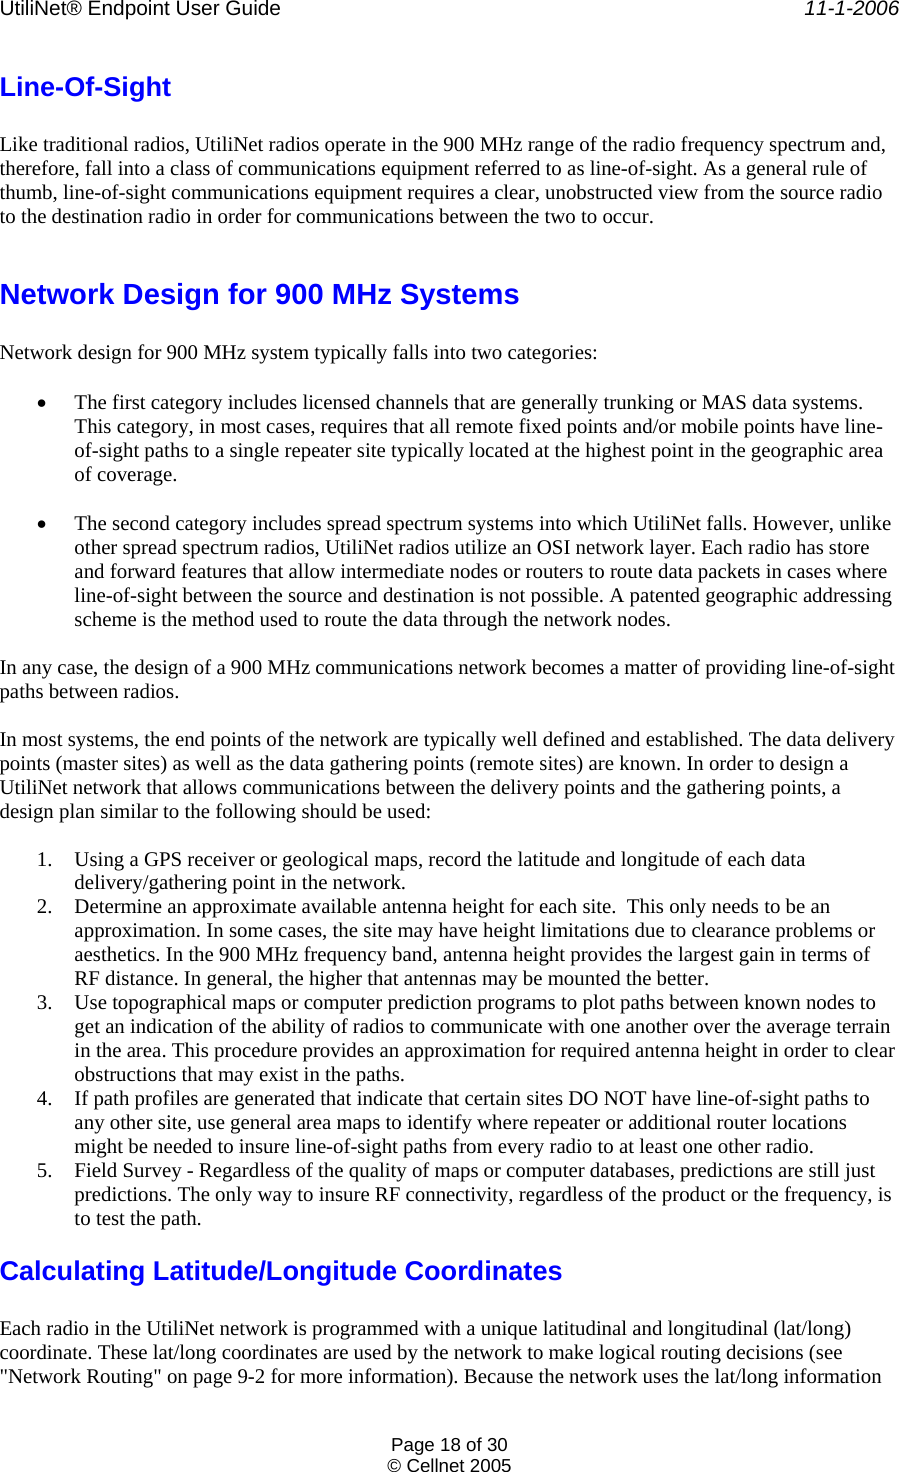 UtiliNet® Endpoint User Guide    11-1-2006 Page 18 of 30 © Cellnet 2005  Line-Of-Sight  Like traditional radios, UtiliNet radios operate in the 900 MHz range of the radio frequency spectrum and, therefore, fall into a class of communications equipment referred to as line-of-sight. As a general rule of thumb, line-of-sight communications equipment requires a clear, unobstructed view from the source radio to the destination radio in order for communications between the two to occur.  Network Design for 900 MHz Systems  Network design for 900 MHz system typically falls into two categories:  • The first category includes licensed channels that are generally trunking or MAS data systems. This category, in most cases, requires that all remote fixed points and/or mobile points have line-of-sight paths to a single repeater site typically located at the highest point in the geographic area of coverage.  • The second category includes spread spectrum systems into which UtiliNet falls. However, unlike other spread spectrum radios, UtiliNet radios utilize an OSI network layer. Each radio has store and forward features that allow intermediate nodes or routers to route data packets in cases where line-of-sight between the source and destination is not possible. A patented geographic addressing scheme is the method used to route the data through the network nodes.  In any case, the design of a 900 MHz communications network becomes a matter of providing line-of-sight paths between radios.  In most systems, the end points of the network are typically well defined and established. The data delivery points (master sites) as well as the data gathering points (remote sites) are known. In order to design a UtiliNet network that allows communications between the delivery points and the gathering points, a design plan similar to the following should be used:  1. Using a GPS receiver or geological maps, record the latitude and longitude of each data delivery/gathering point in the network. 2. Determine an approximate available antenna height for each site.  This only needs to be an approximation. In some cases, the site may have height limitations due to clearance problems or aesthetics. In the 900 MHz frequency band, antenna height provides the largest gain in terms of RF distance. In general, the higher that antennas may be mounted the better. 3. Use topographical maps or computer prediction programs to plot paths between known nodes to get an indication of the ability of radios to communicate with one another over the average terrain in the area. This procedure provides an approximation for required antenna height in order to clear obstructions that may exist in the paths. 4. If path profiles are generated that indicate that certain sites DO NOT have line-of-sight paths to any other site, use general area maps to identify where repeater or additional router locations might be needed to insure line-of-sight paths from every radio to at least one other radio. 5. Field Survey - Regardless of the quality of maps or computer databases, predictions are still just predictions. The only way to insure RF connectivity, regardless of the product or the frequency, is to test the path. Calculating Latitude/Longitude Coordinates  Each radio in the UtiliNet network is programmed with a unique latitudinal and longitudinal (lat/long) coordinate. These lat/long coordinates are used by the network to make logical routing decisions (see &quot;Network Routing&quot; on page 9-2 for more information). Because the network uses the lat/long information 